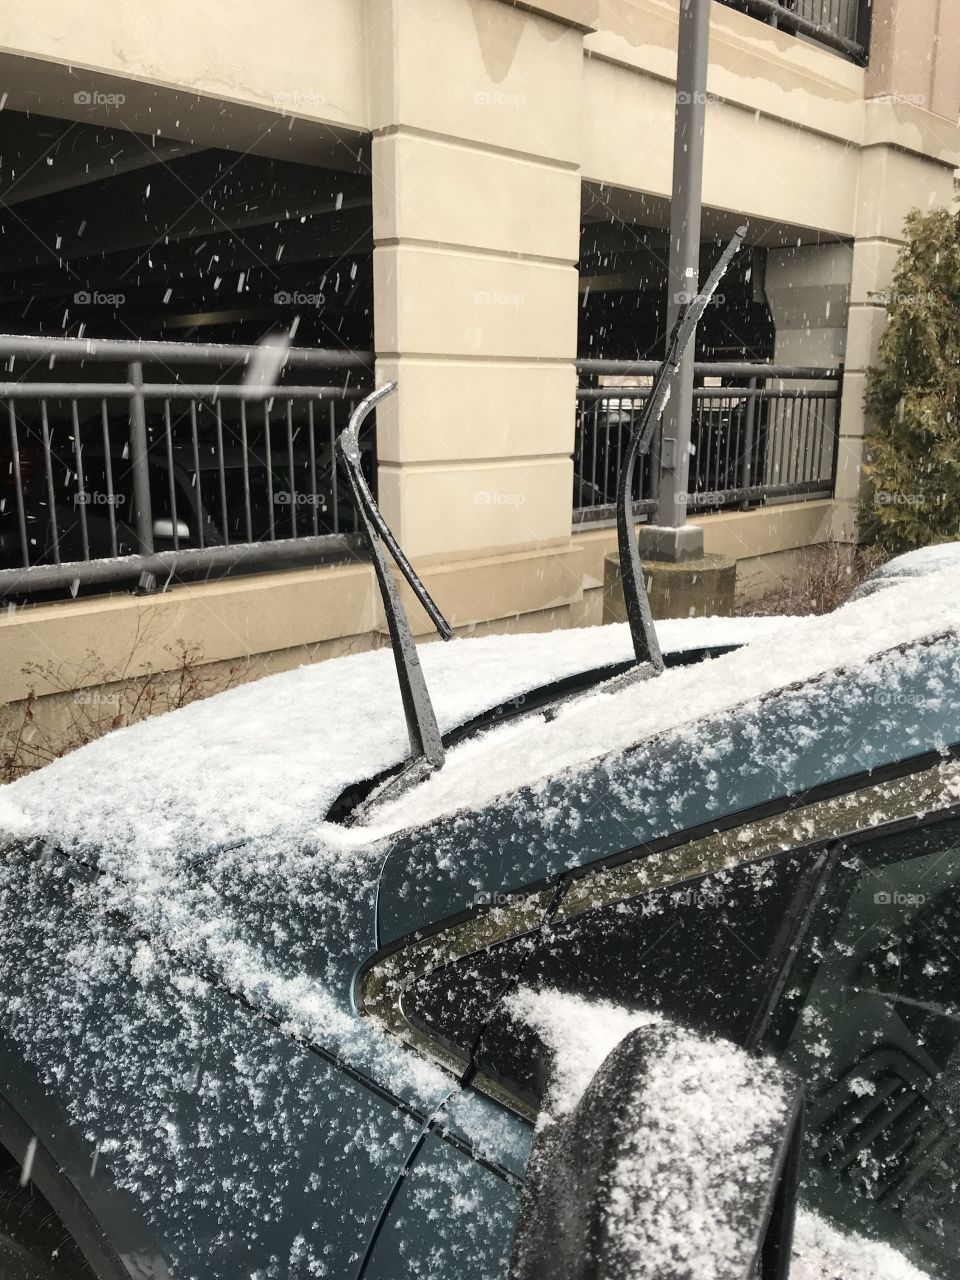 Windshield wipers up on the car for winter 